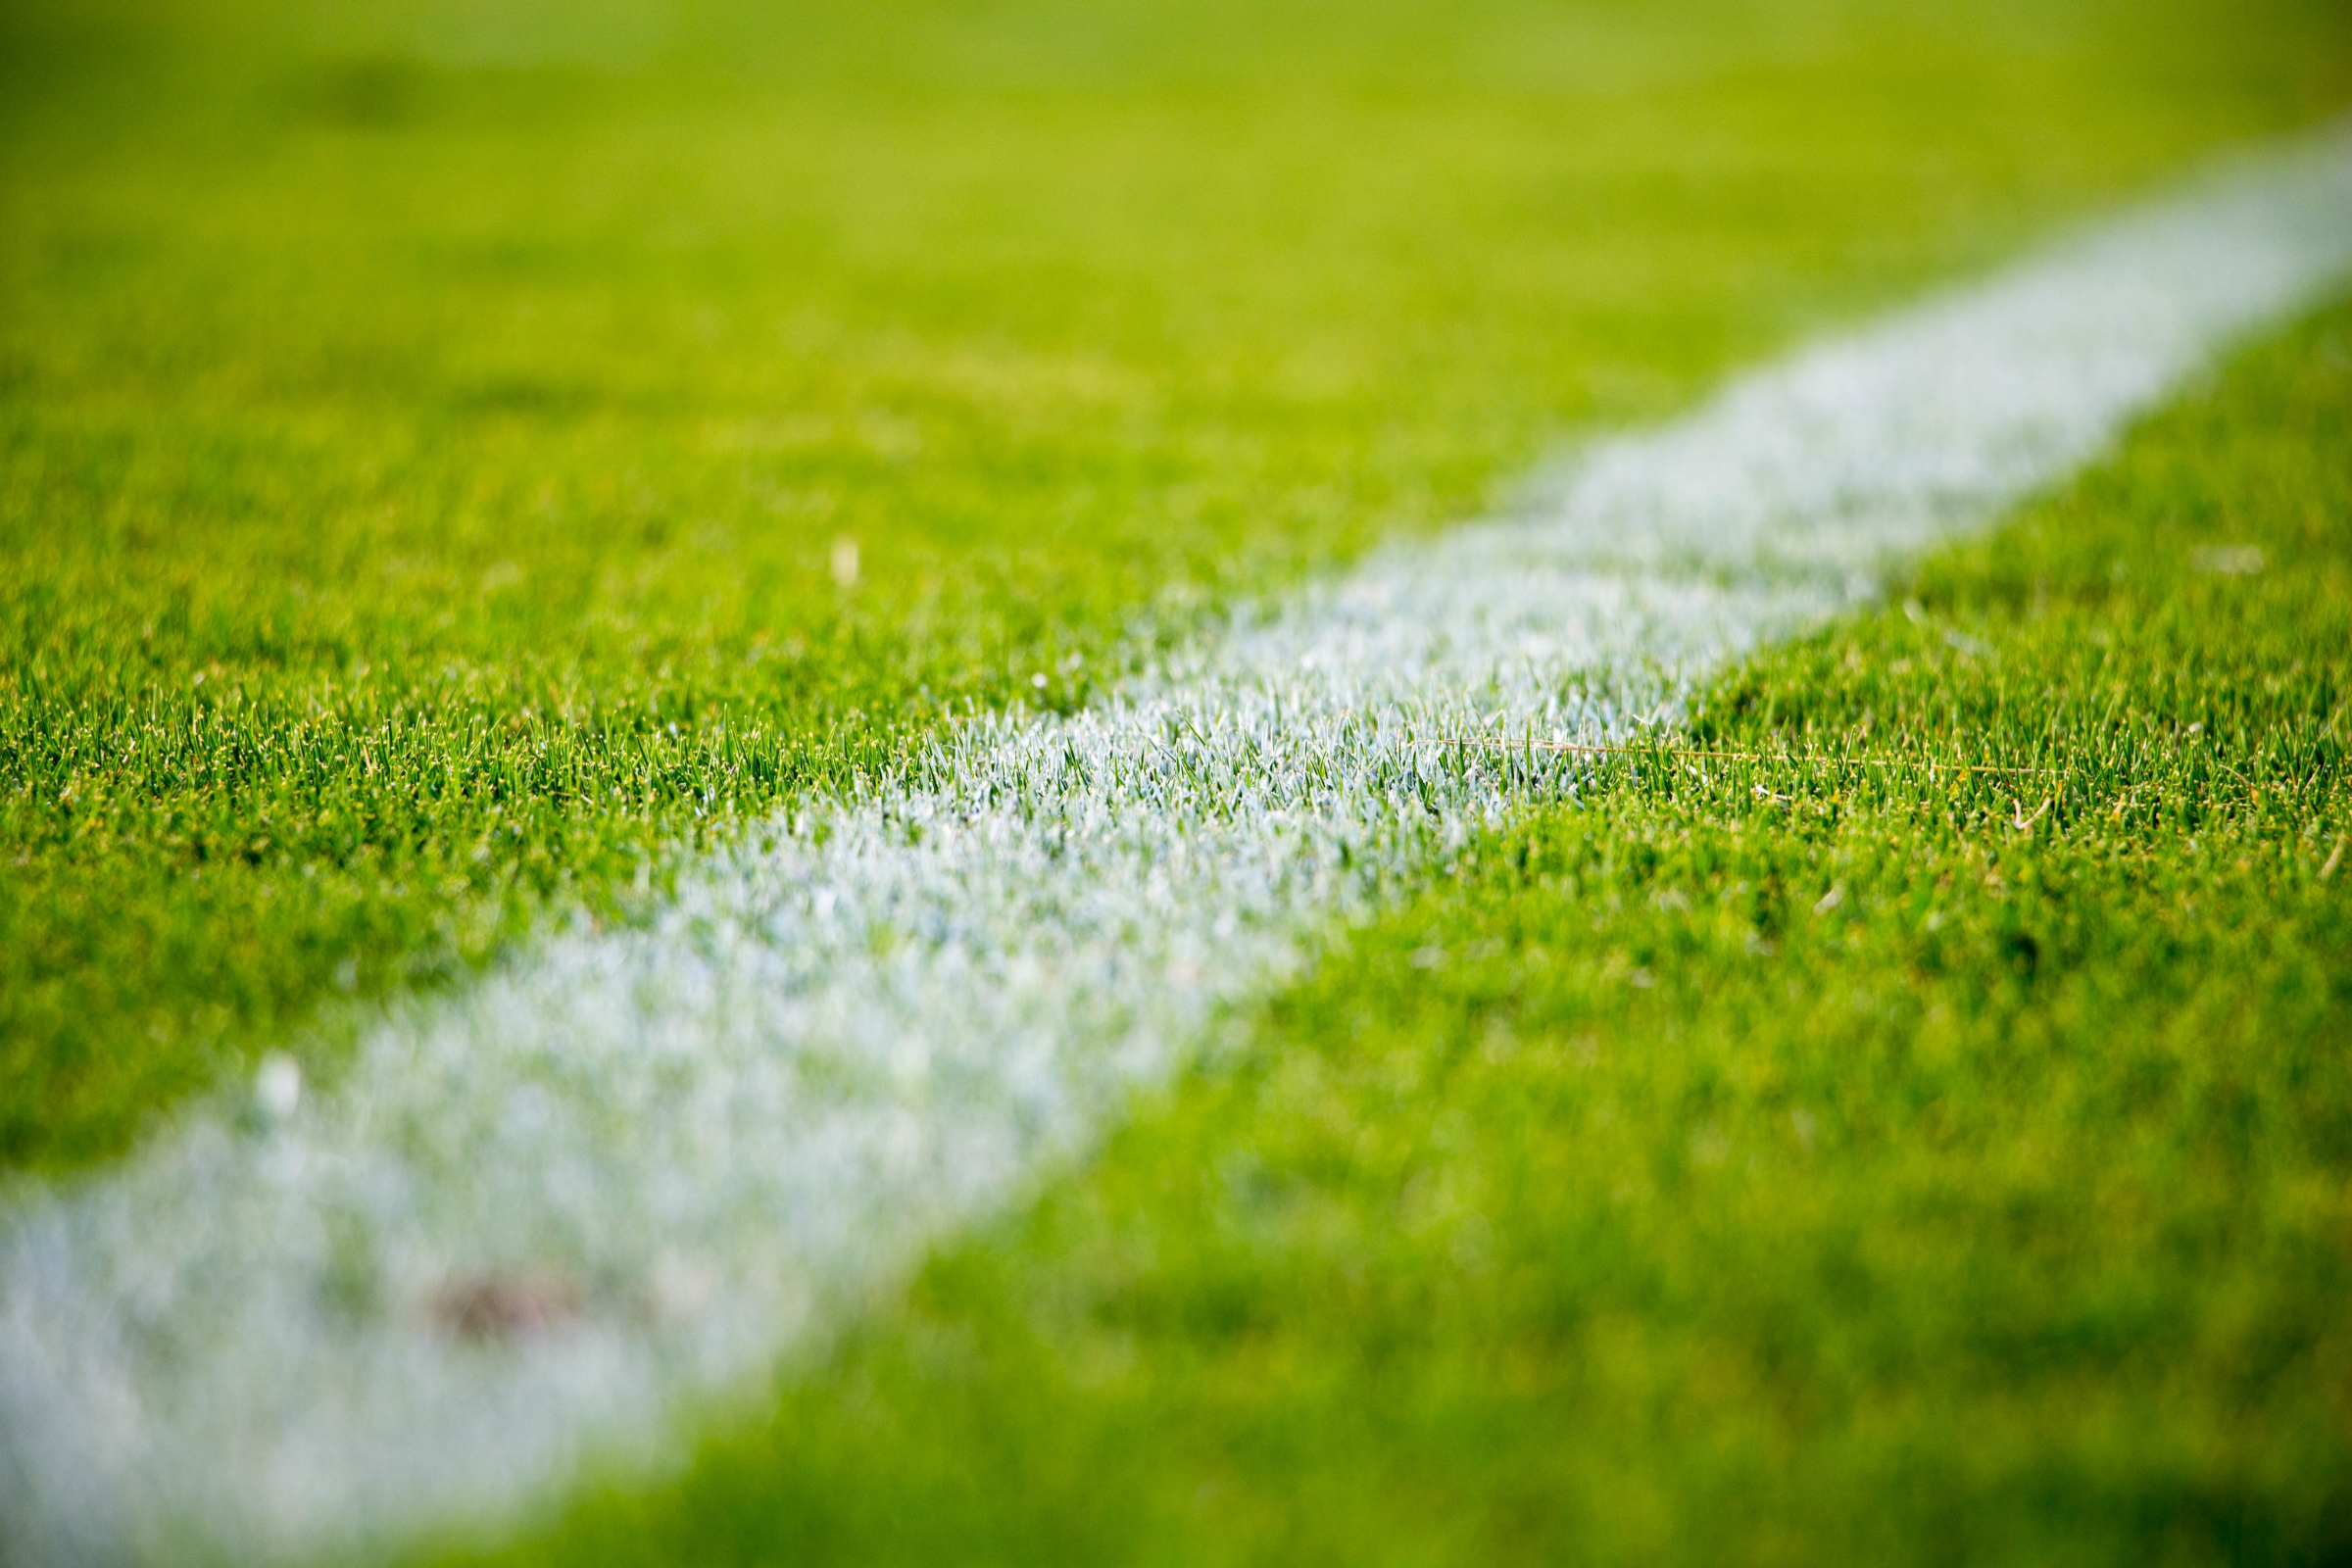 a close-up of the bright green turf with a white line of a sports field